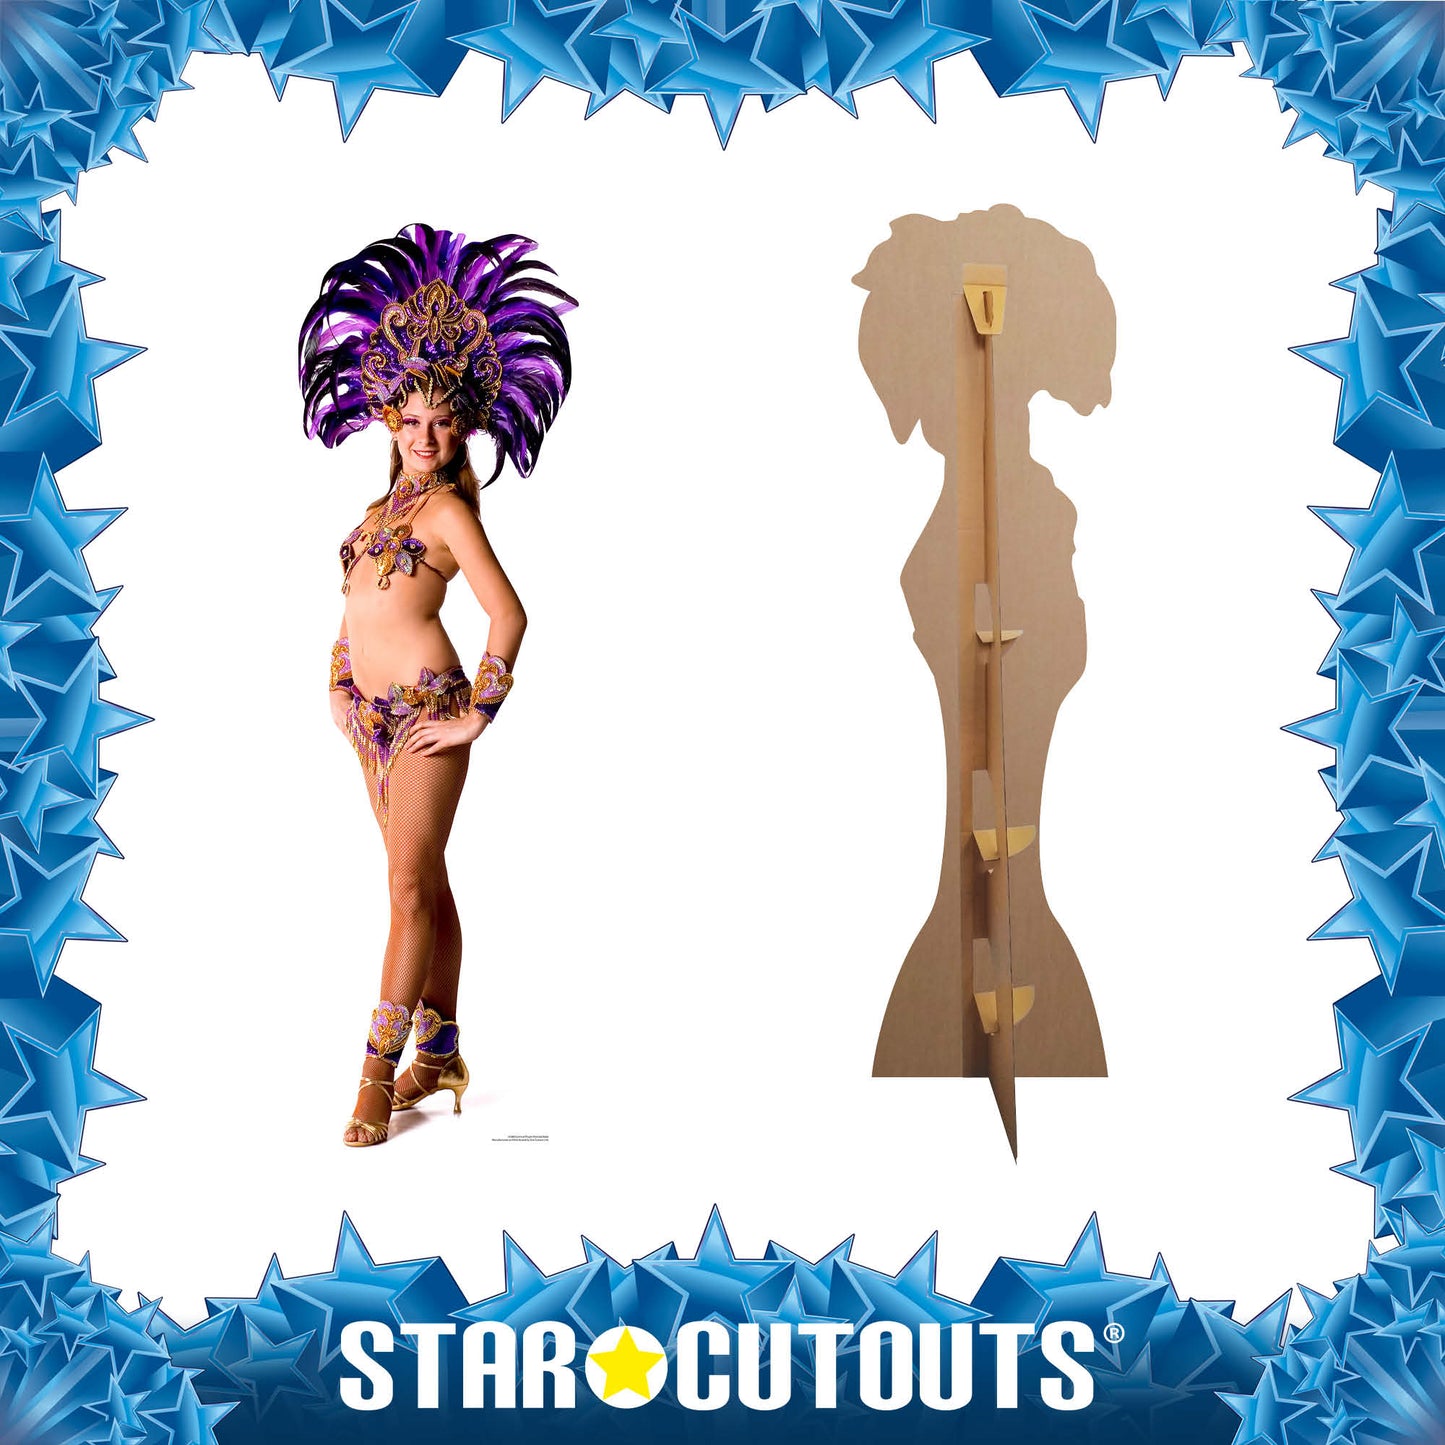 SC860 Carnival Purple Peacock Babe Cardboard Cut Out Height 194cm